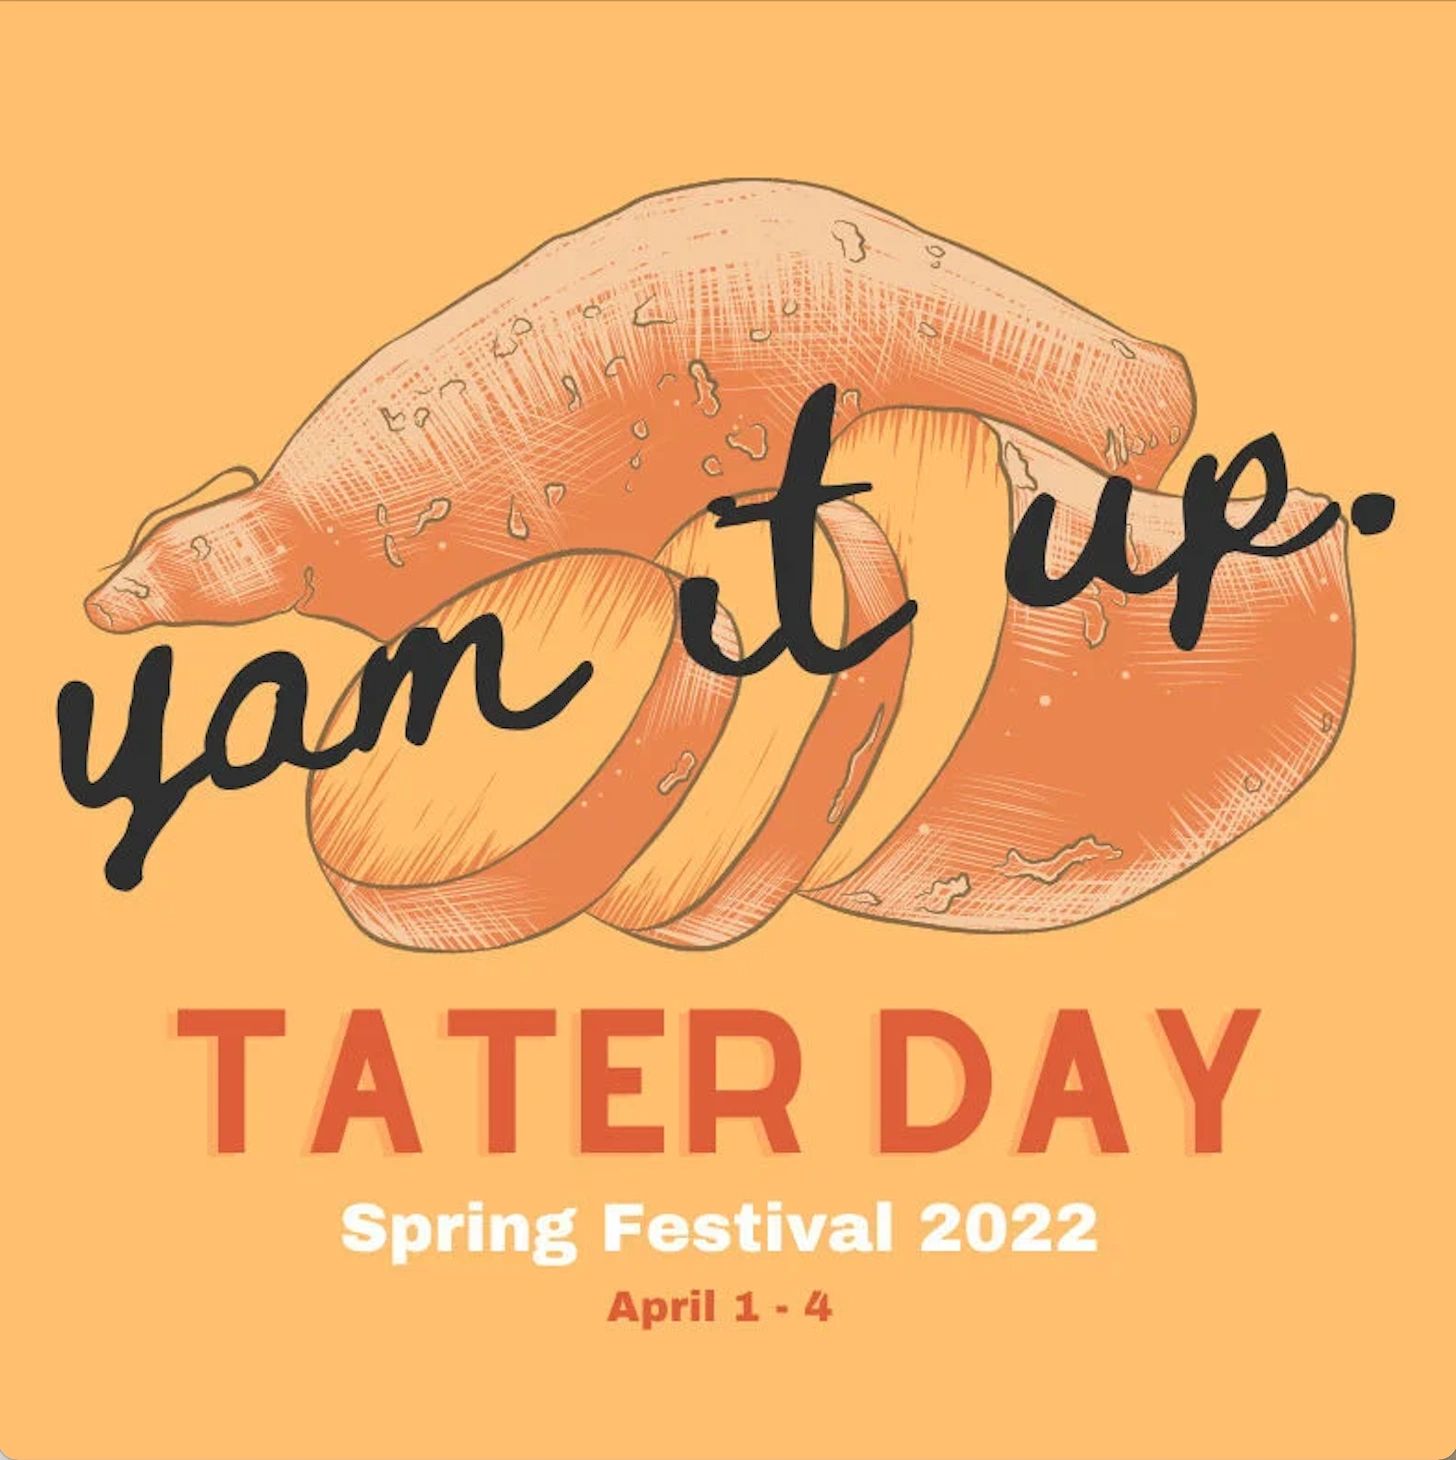 It's Tater Day in Kentucky!